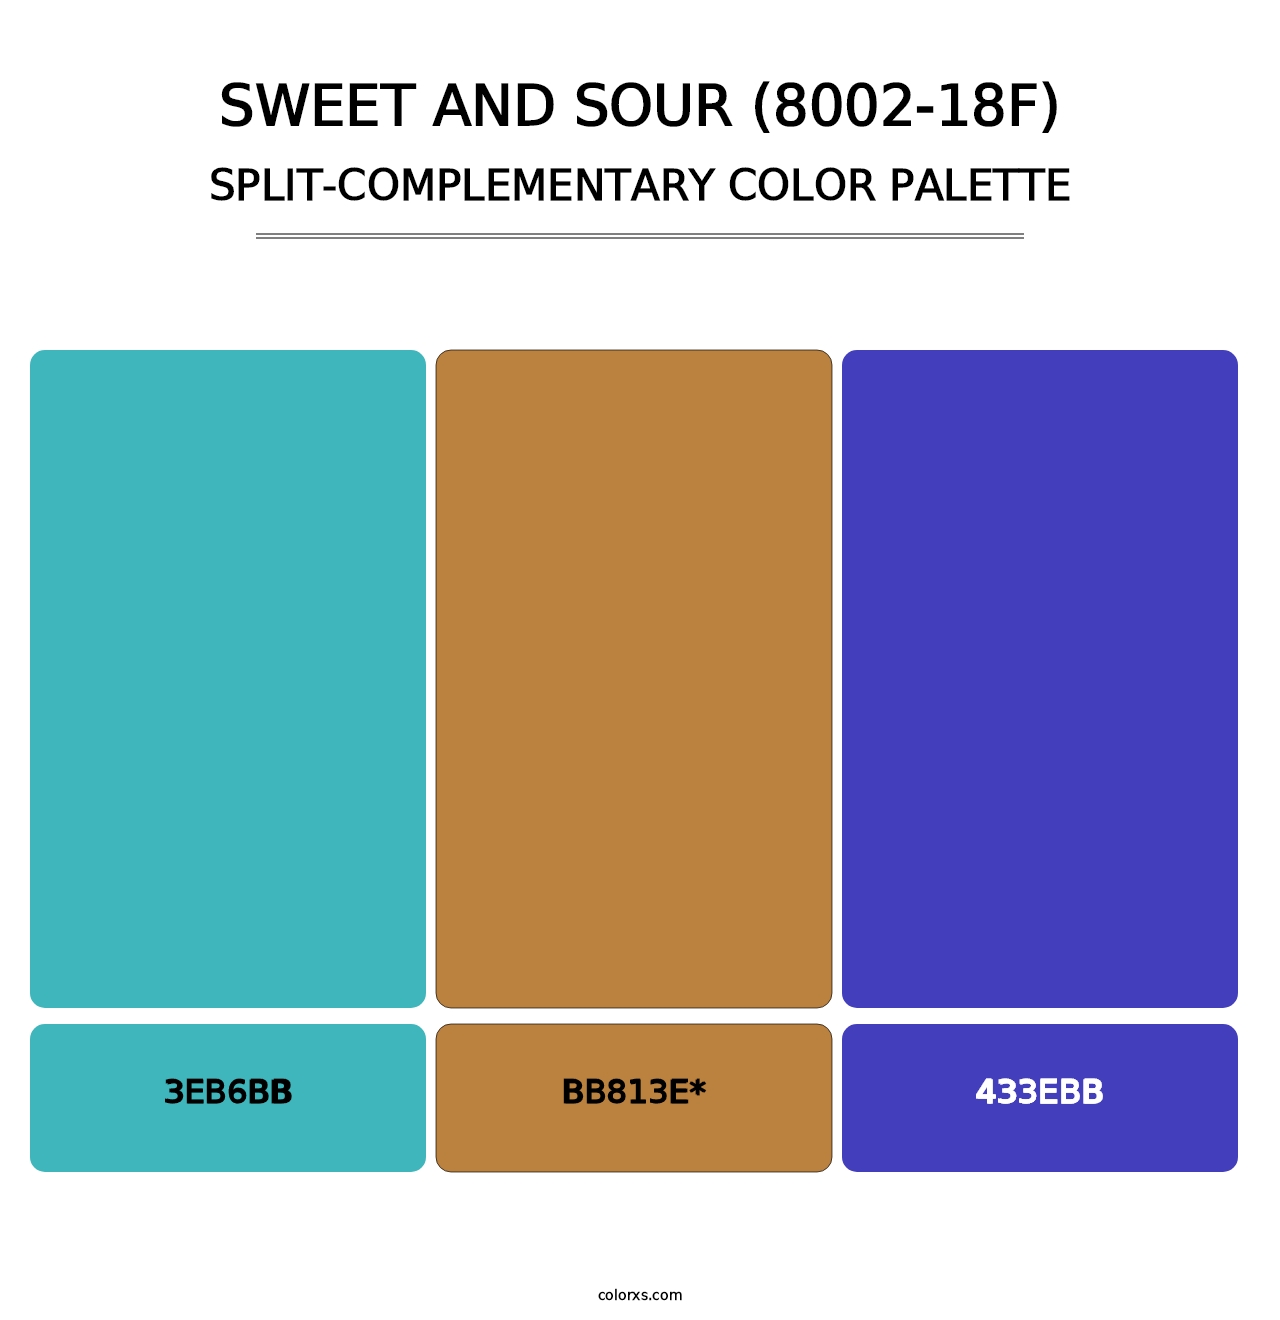 Sweet and Sour (8002-18F) - Split-Complementary Color Palette